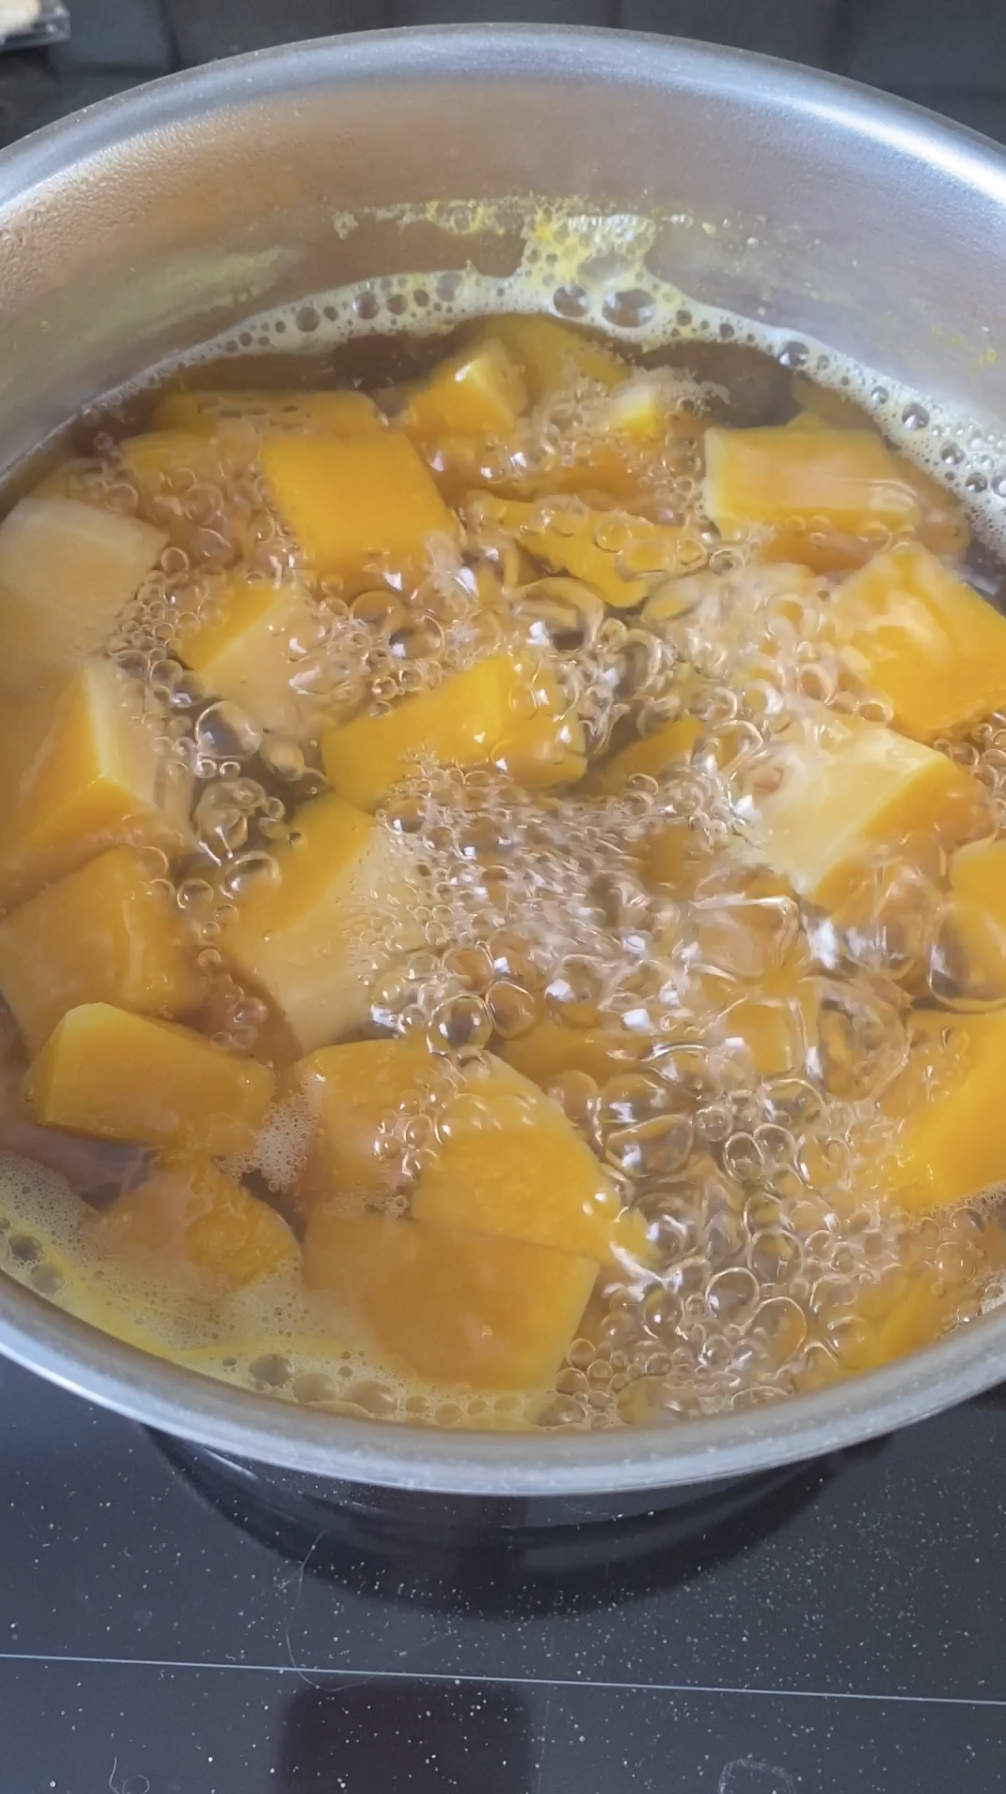 Butternut squash cubes cooking in a pot of boiling water.